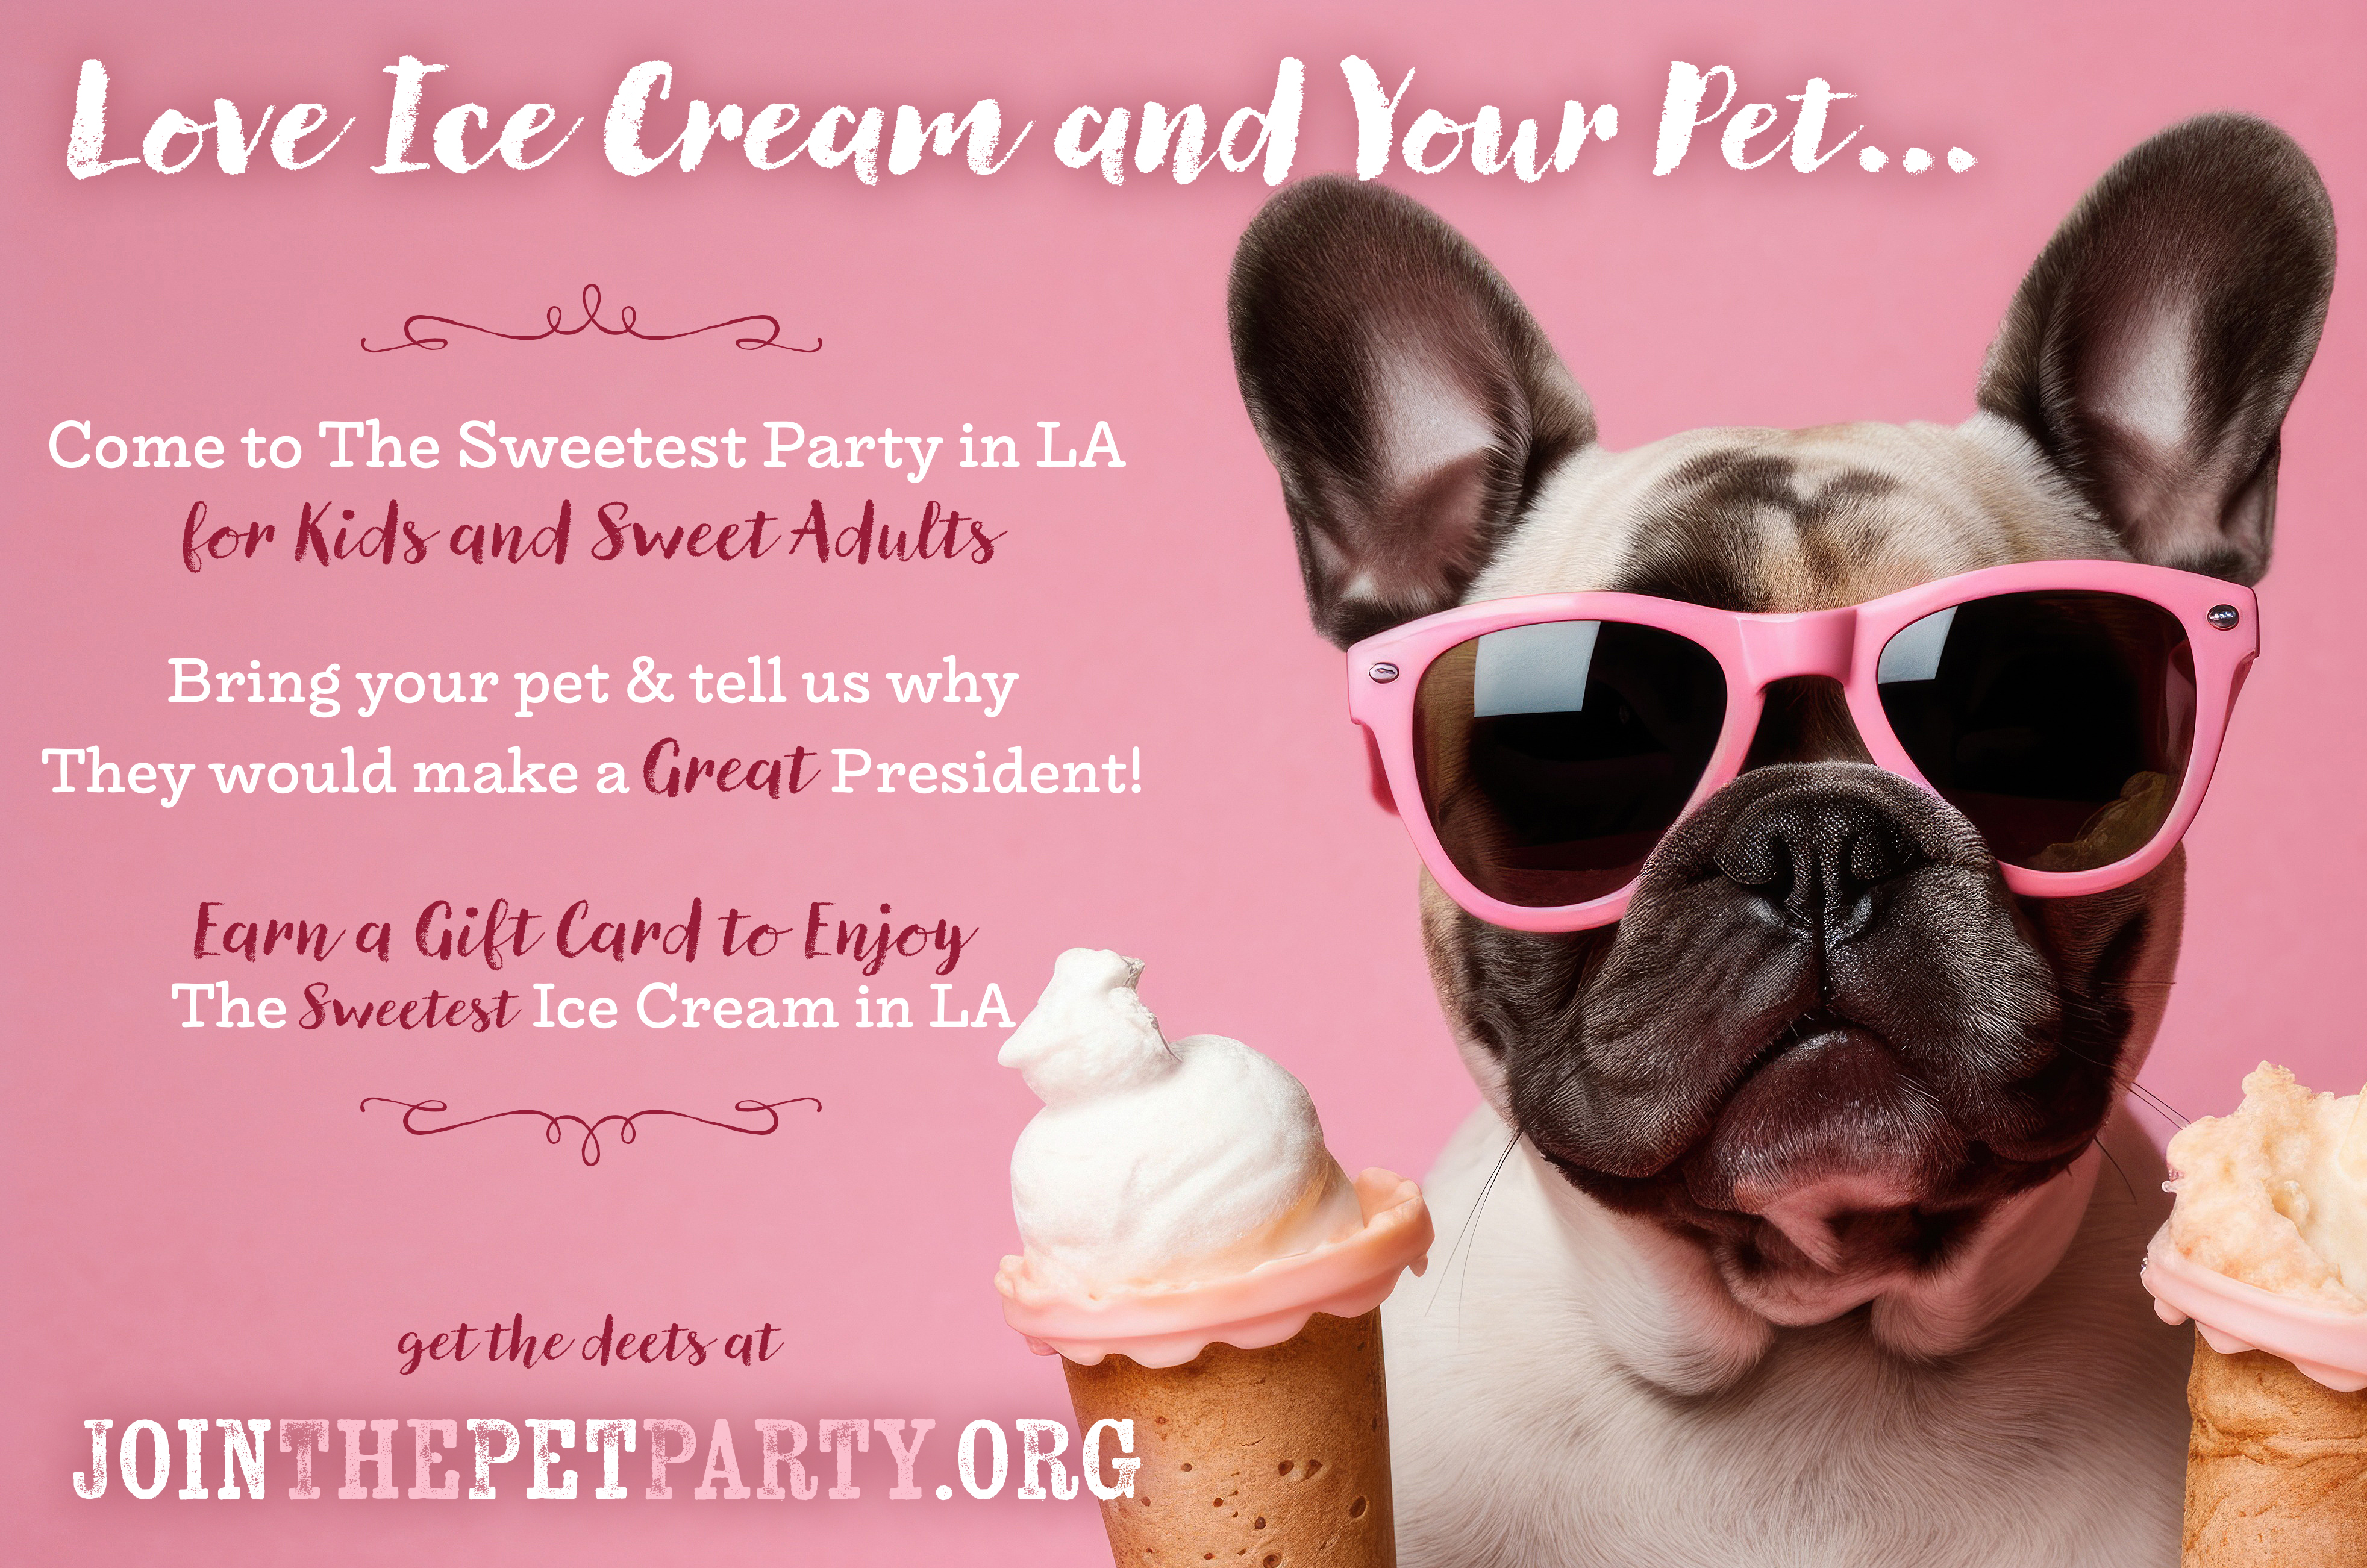 Love to Party for Good? Attend The Sweetest Party in LA for Happy Pets and Sweet Human Friends Labor Day Weekend www.JoinThePetParty.com